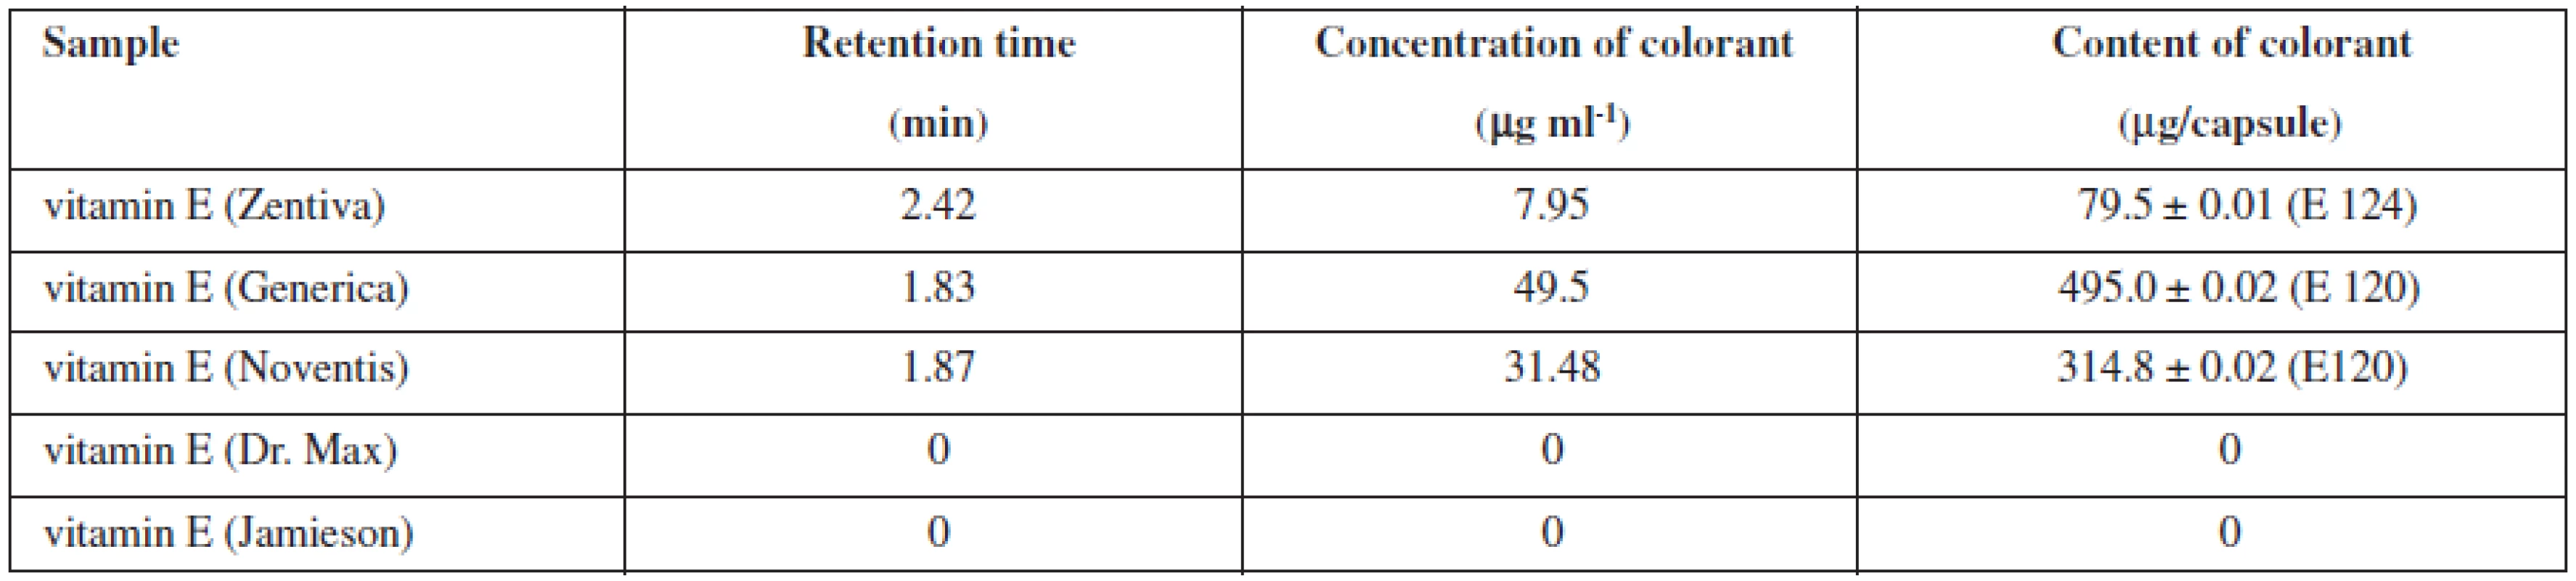 Retention time of different kinds of vitamin E, Ponceau 4R and carmine content in samples of vitamin E